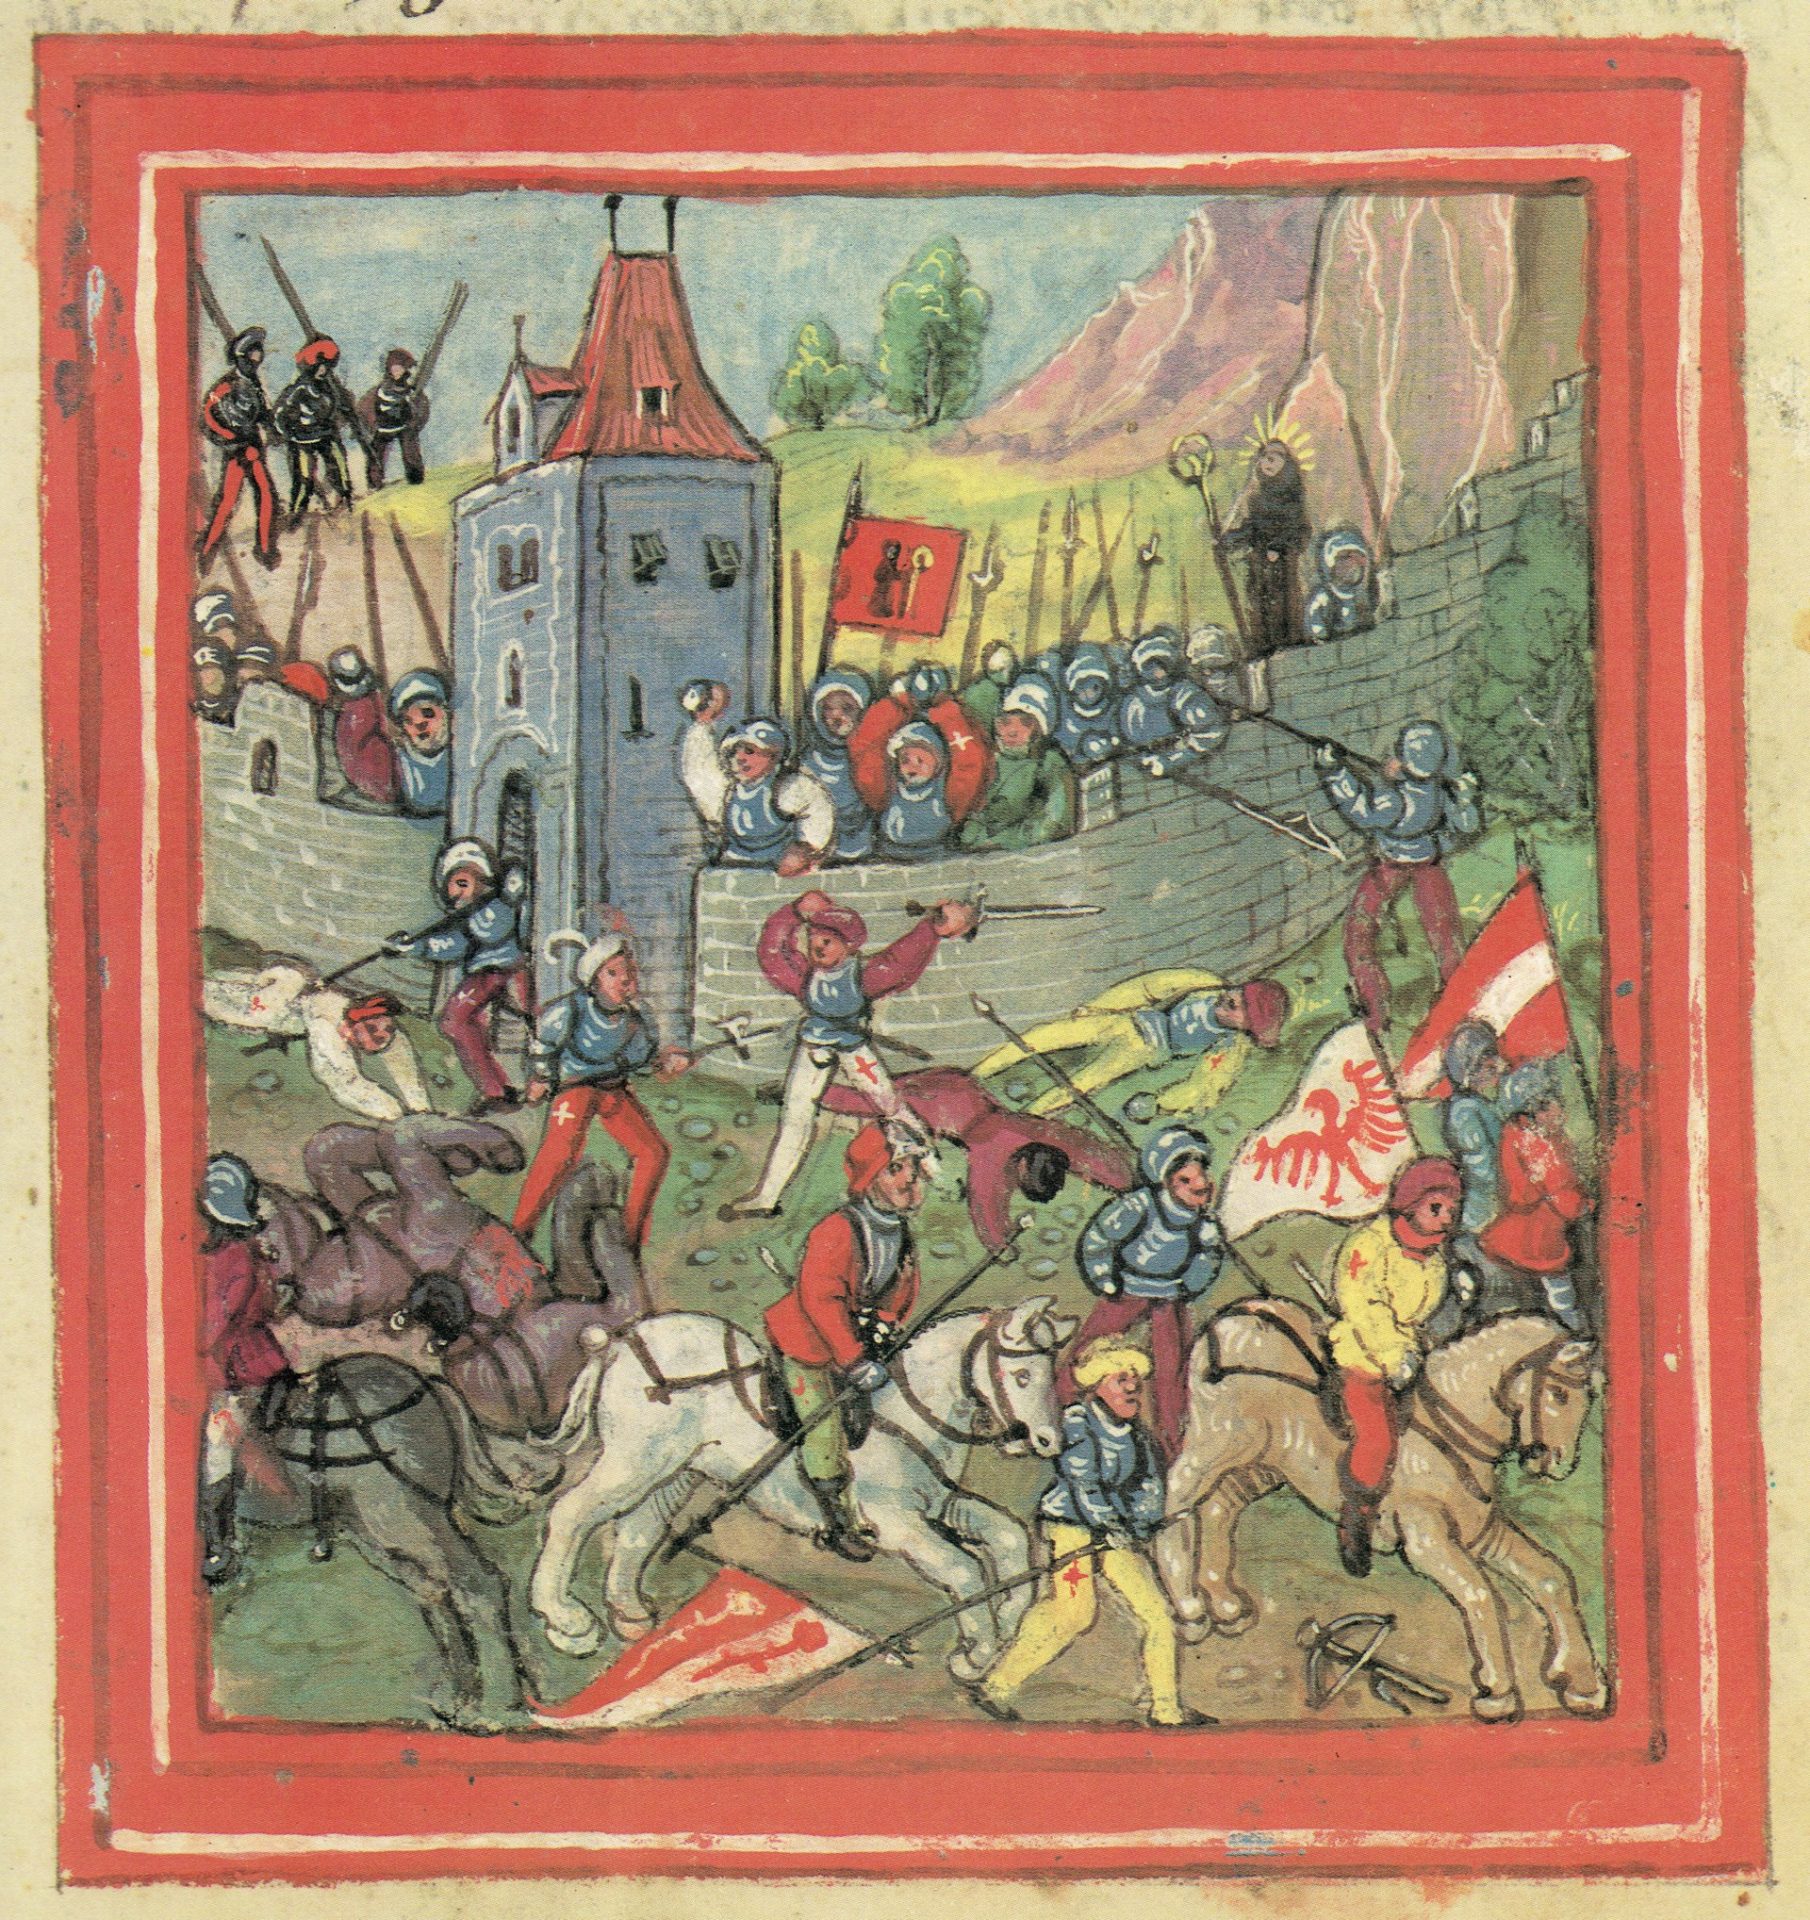 Today in History: Swiss defeat Austrians in decisive battle of Näfels, leading to Glarus’ independence from Habsburg rule.